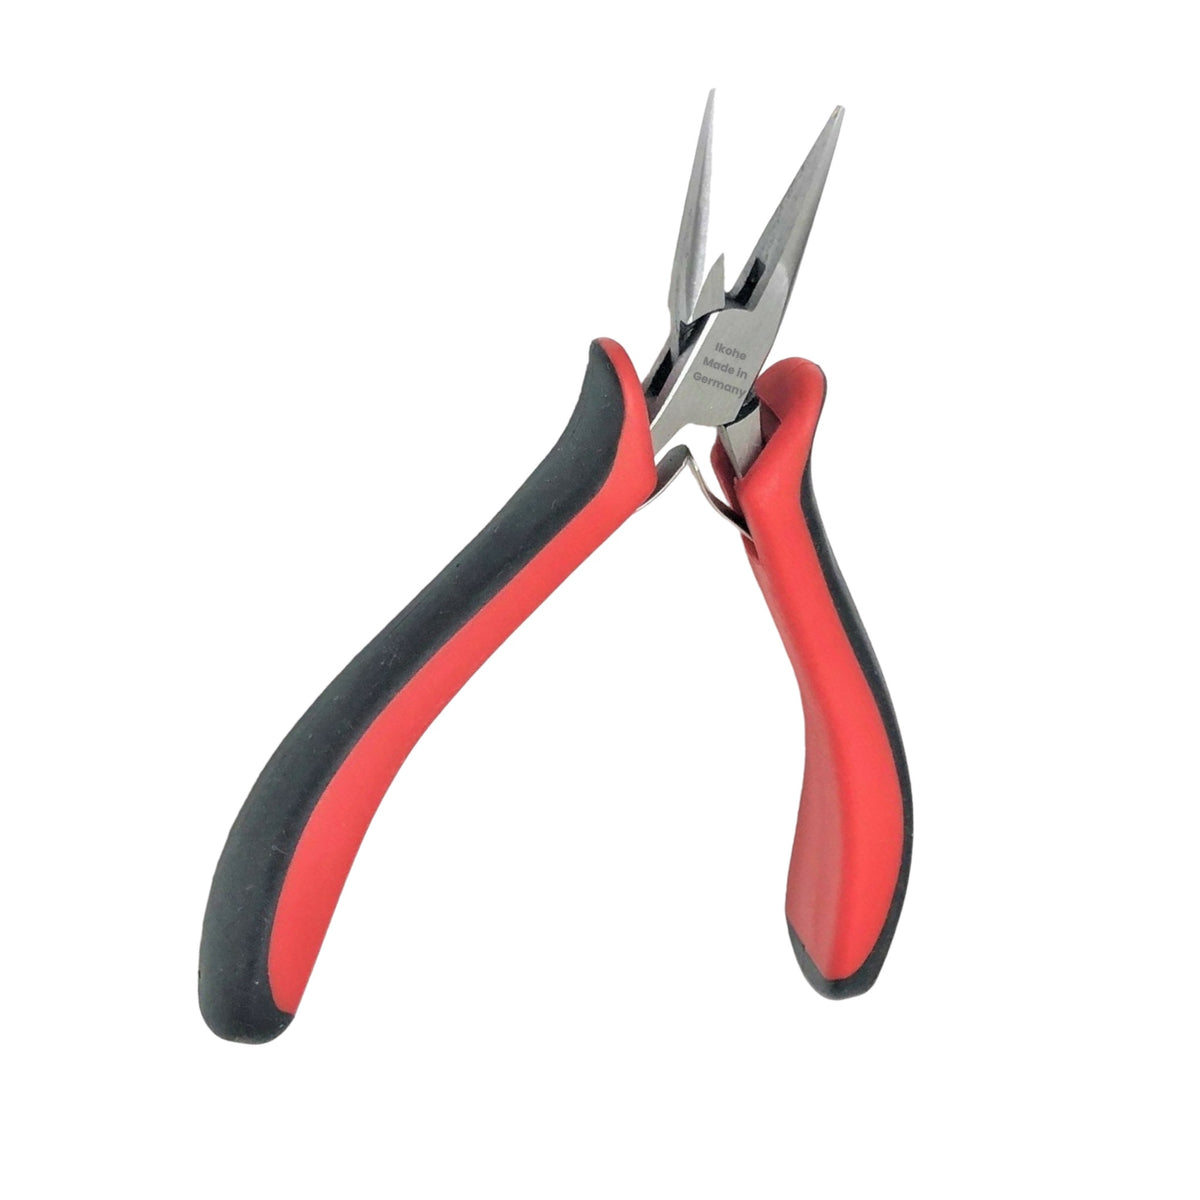 Ikohe Y2K PLIER 4-1/2" CHAIN NOSE DBL